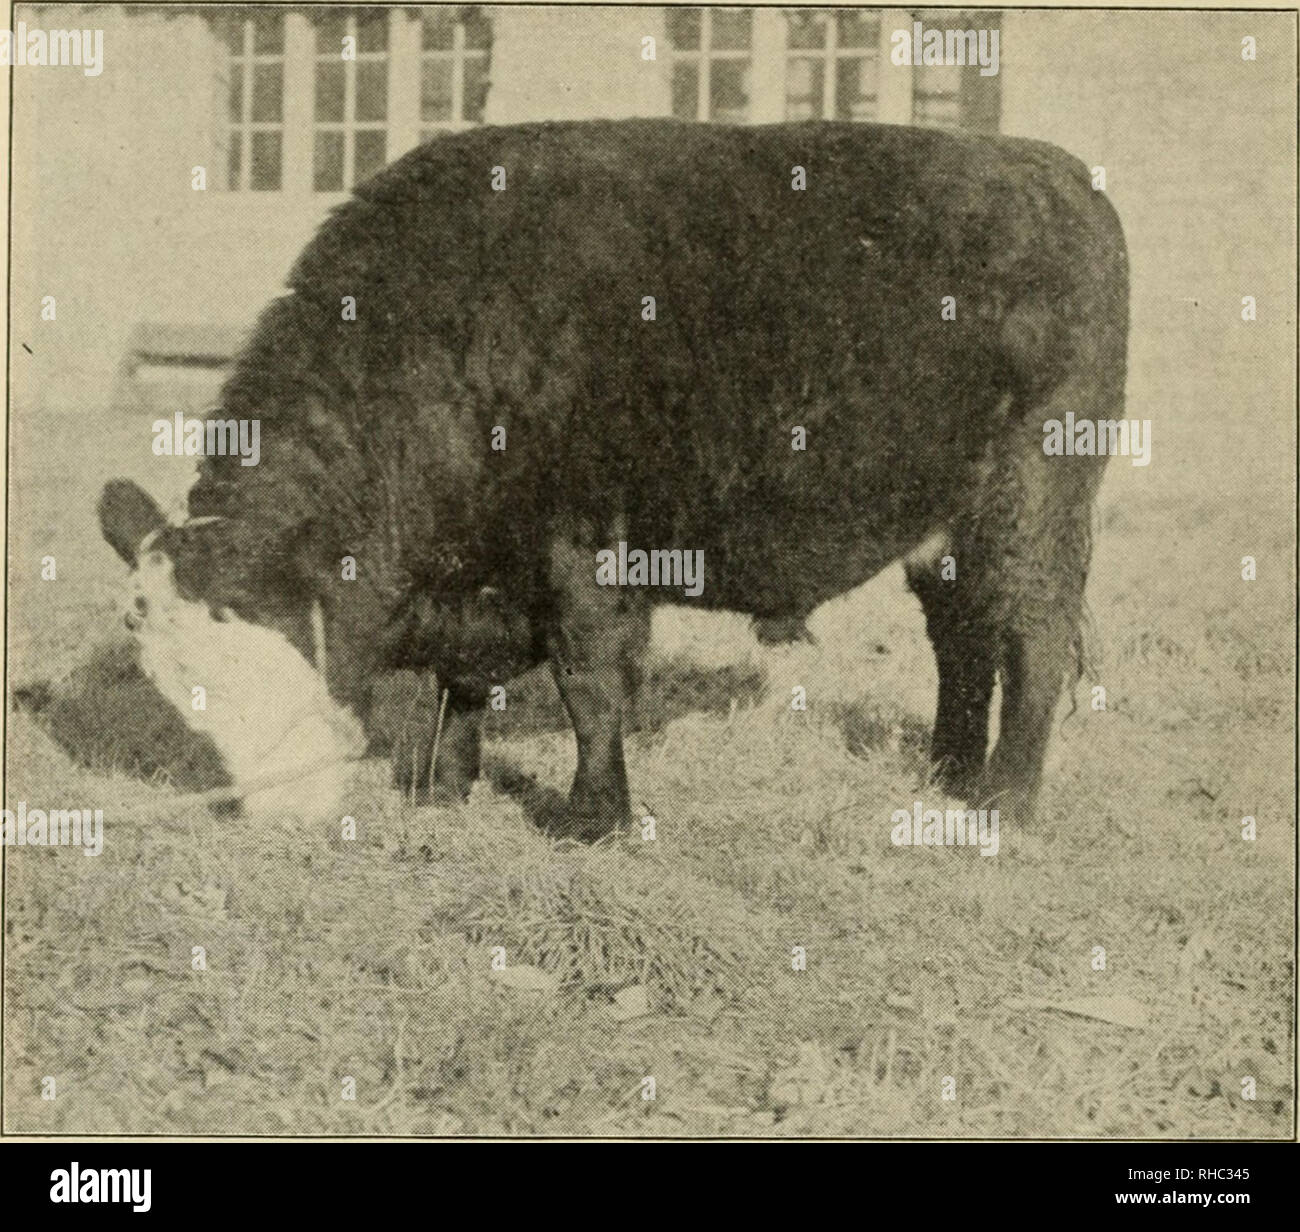 The book of live stock champions, being an artistic souvenir supplement of  the monthly National Farmer and Stock Grower. Livestock. 148 THE BOOK OF  LIVE STOCK CHAMPIONS,. DESERTER—A CROSS-BRED STEER. Champion